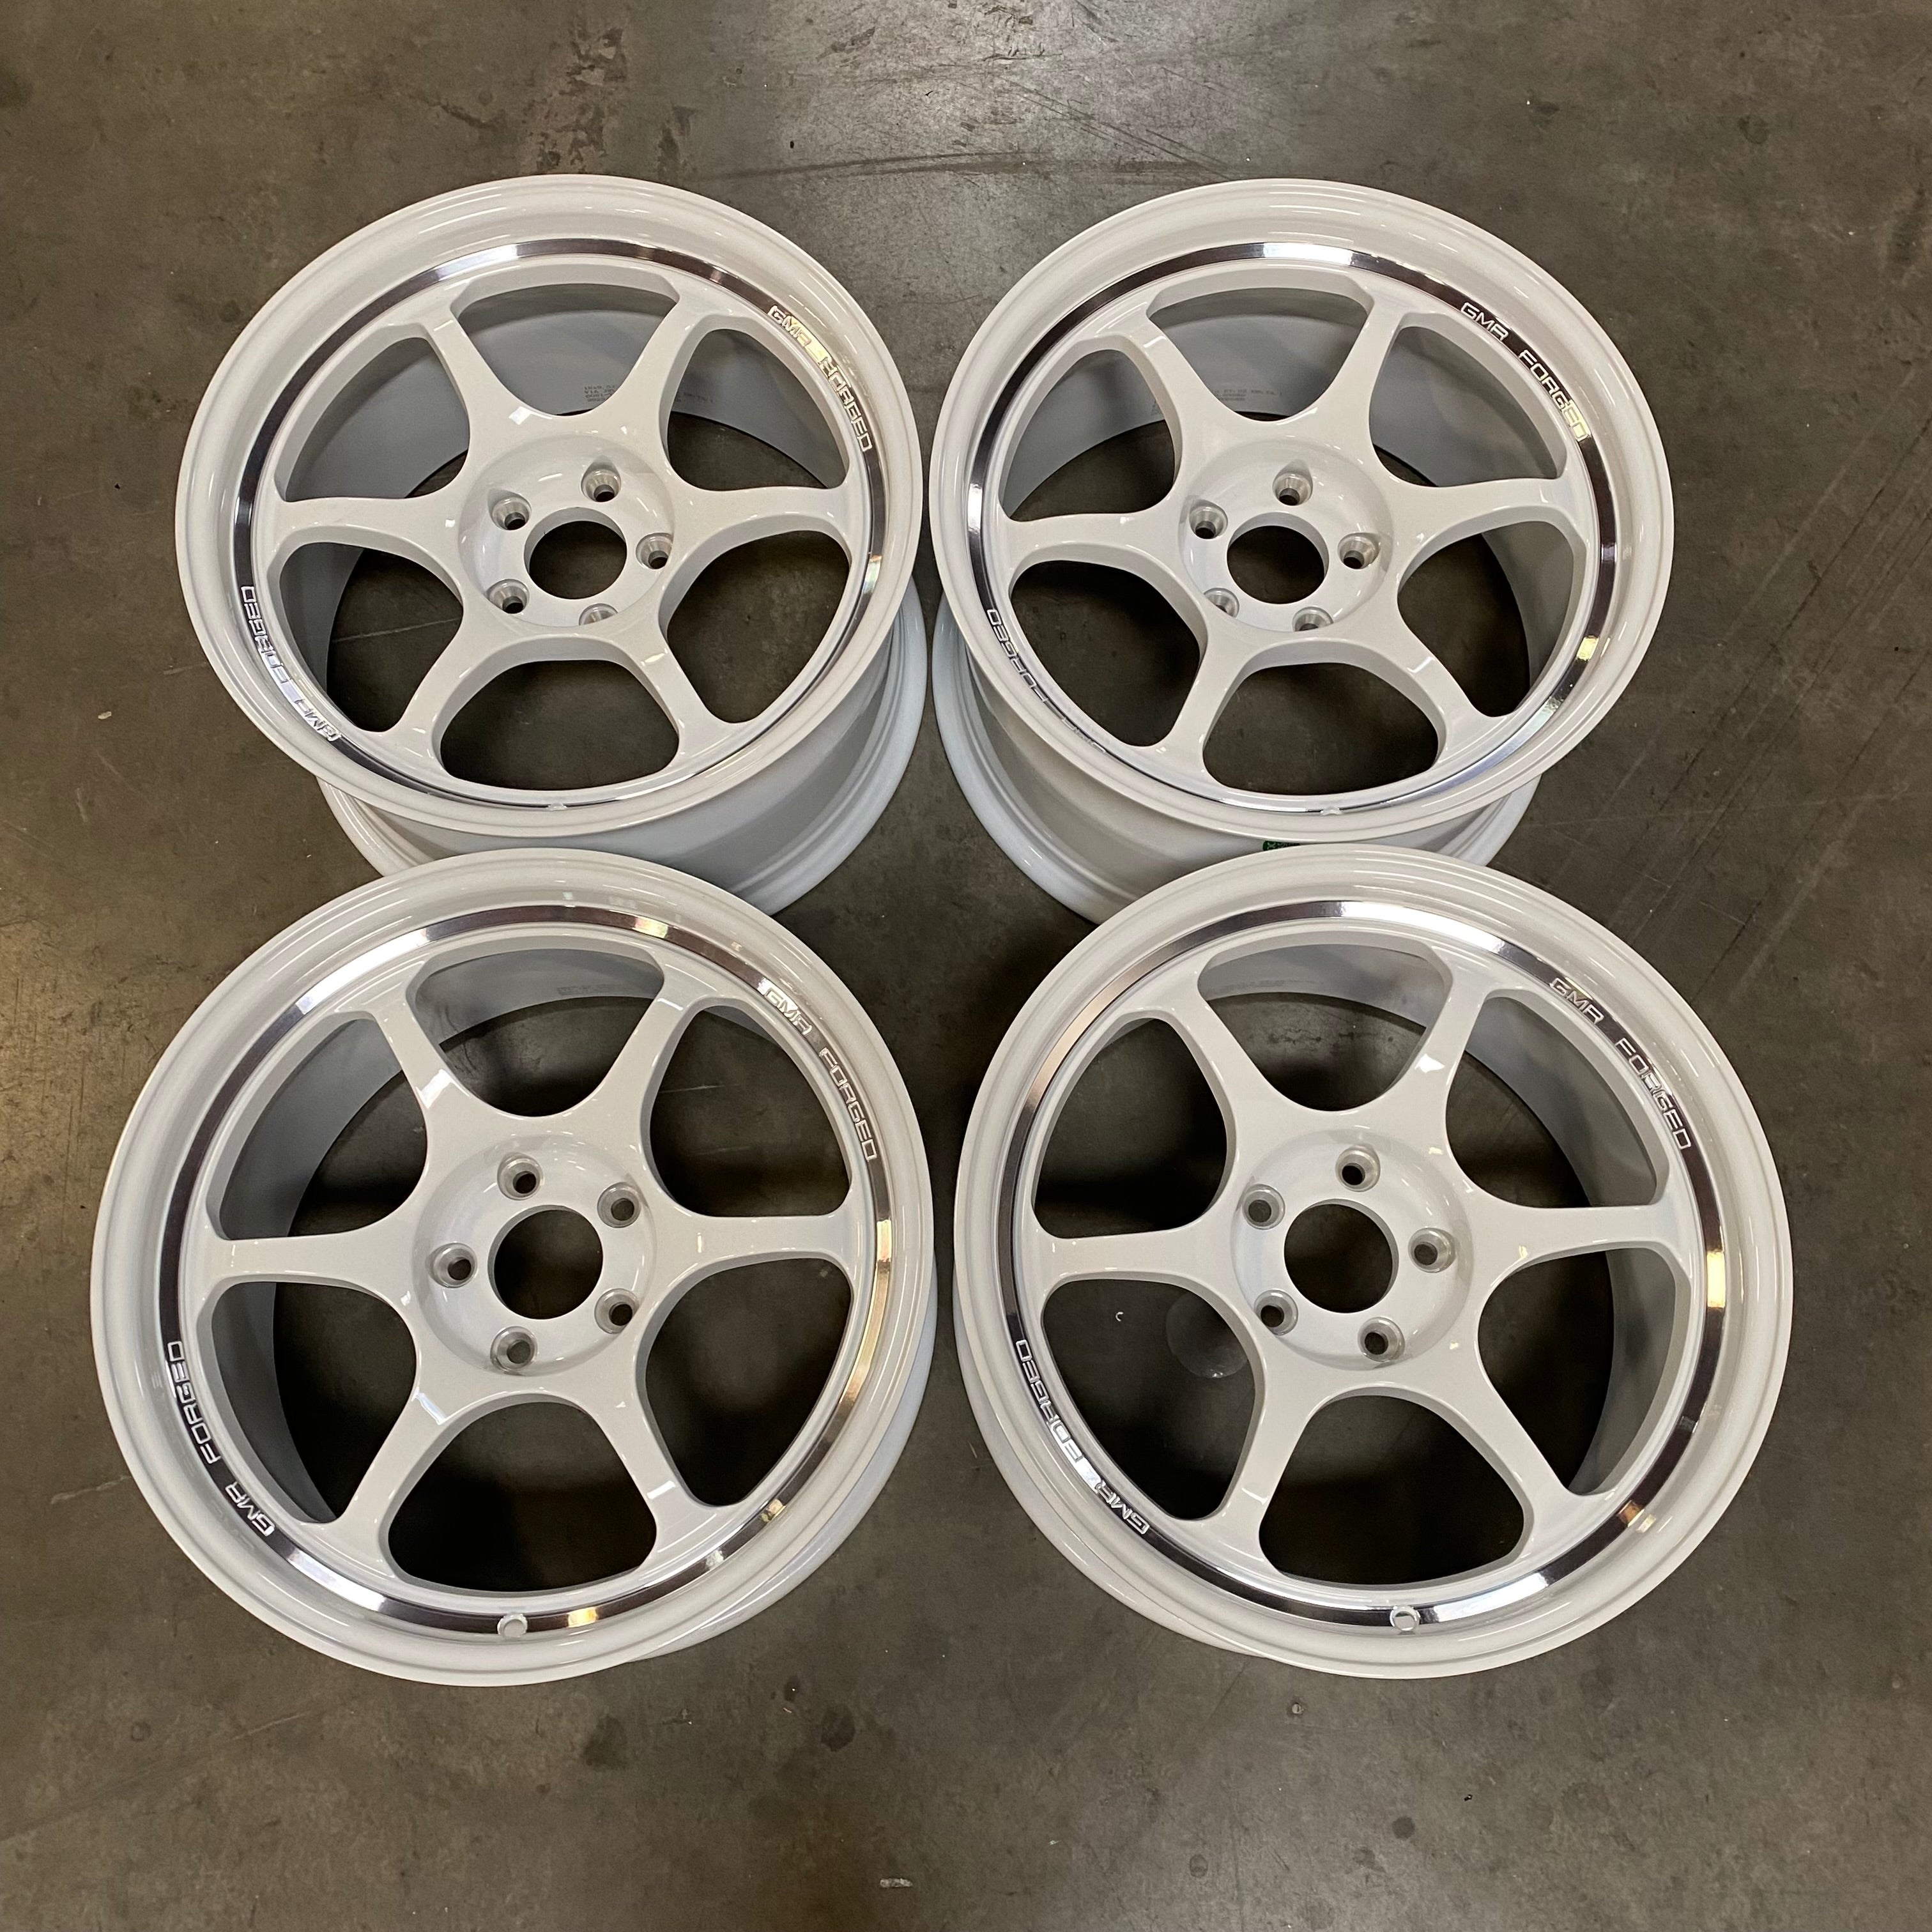 18” R1 Forged - In Stock Set